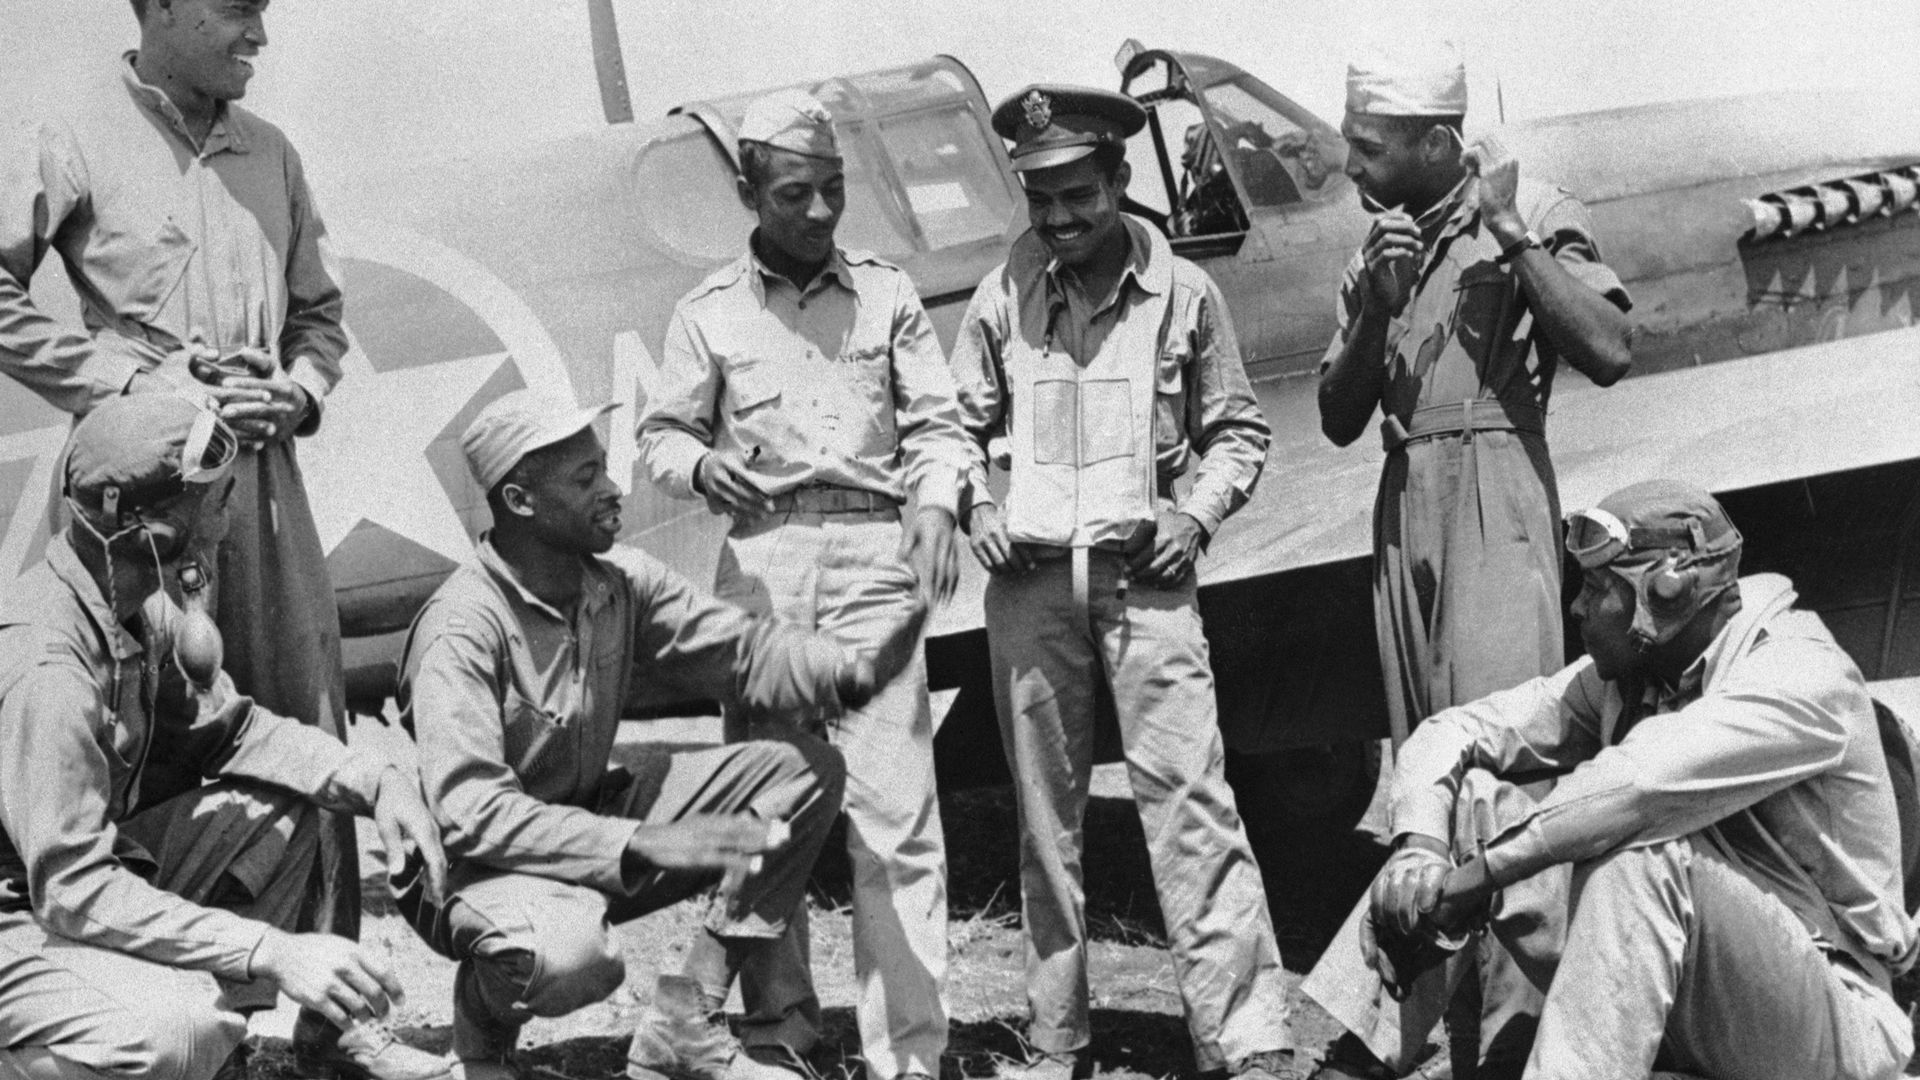 How Tuskegee Airmen Fought Military Segregation With Nonviolent Action